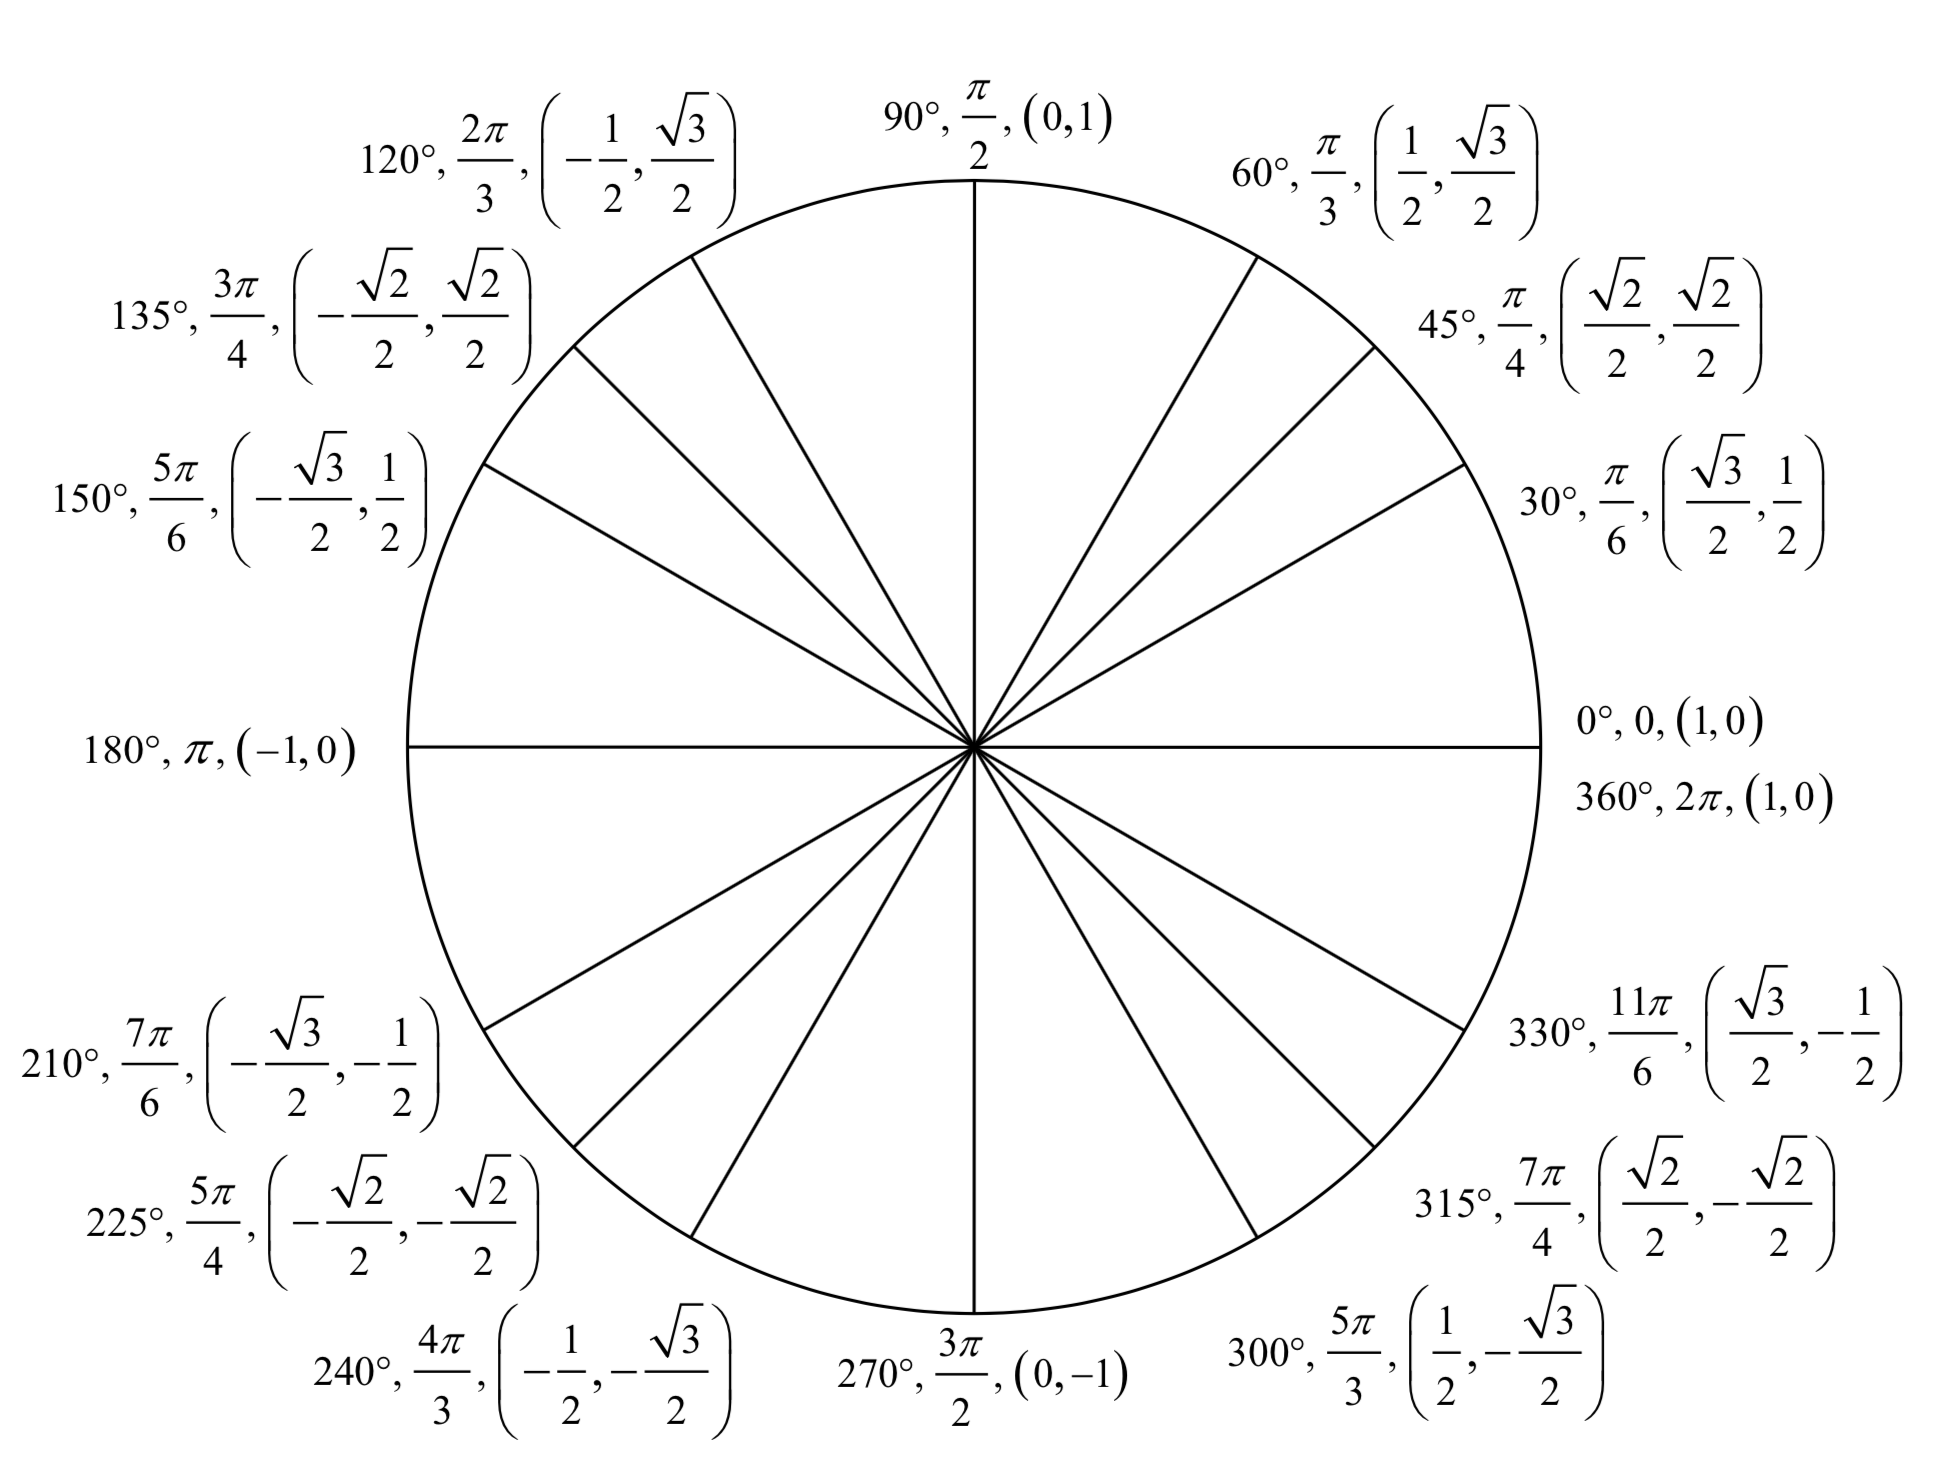 An image of a unit circle with special angles and coordinates of the points labeled.  In the first quadrant, angle 0 at point 1 comma 0, angle 30 degrees or pi over 6 at square root of 3 over 2 comma one half, angle 45 degrees or pi over 4 at square root of 2 over 2 comma square root of 2 over 2, angle 60 degrees or pi over 3 at one half comma square root of 3 over 2, angle 90 degrees or pi over 2 at 0 comma 1.  Multiples of 30 degrees and 45 degrees in the other quadrants are labeled with reflected coordinates. 